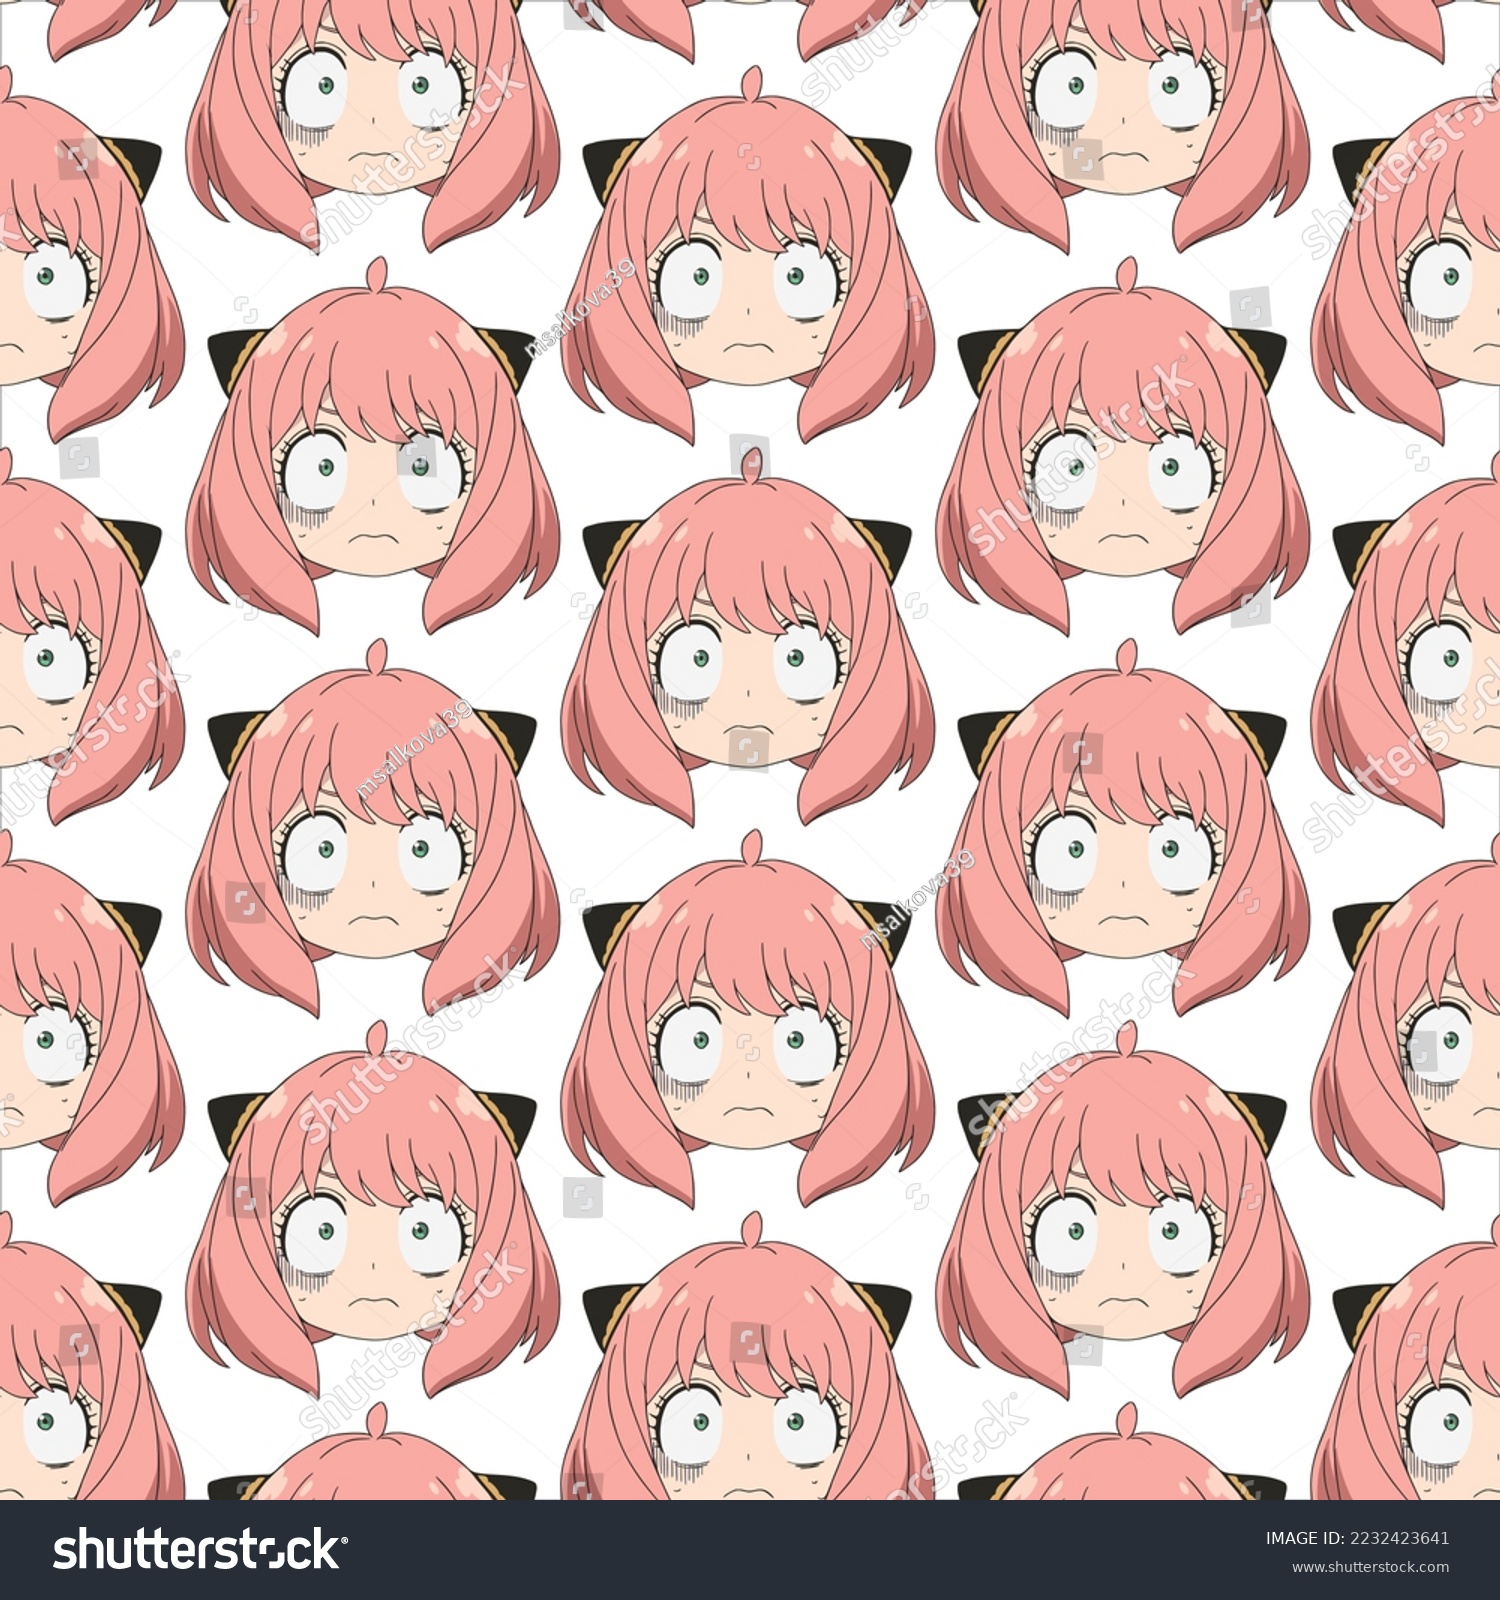 SVG of Frightened girl with wide open eyes, the girl has ears and lush pink hair, grid pattern svg